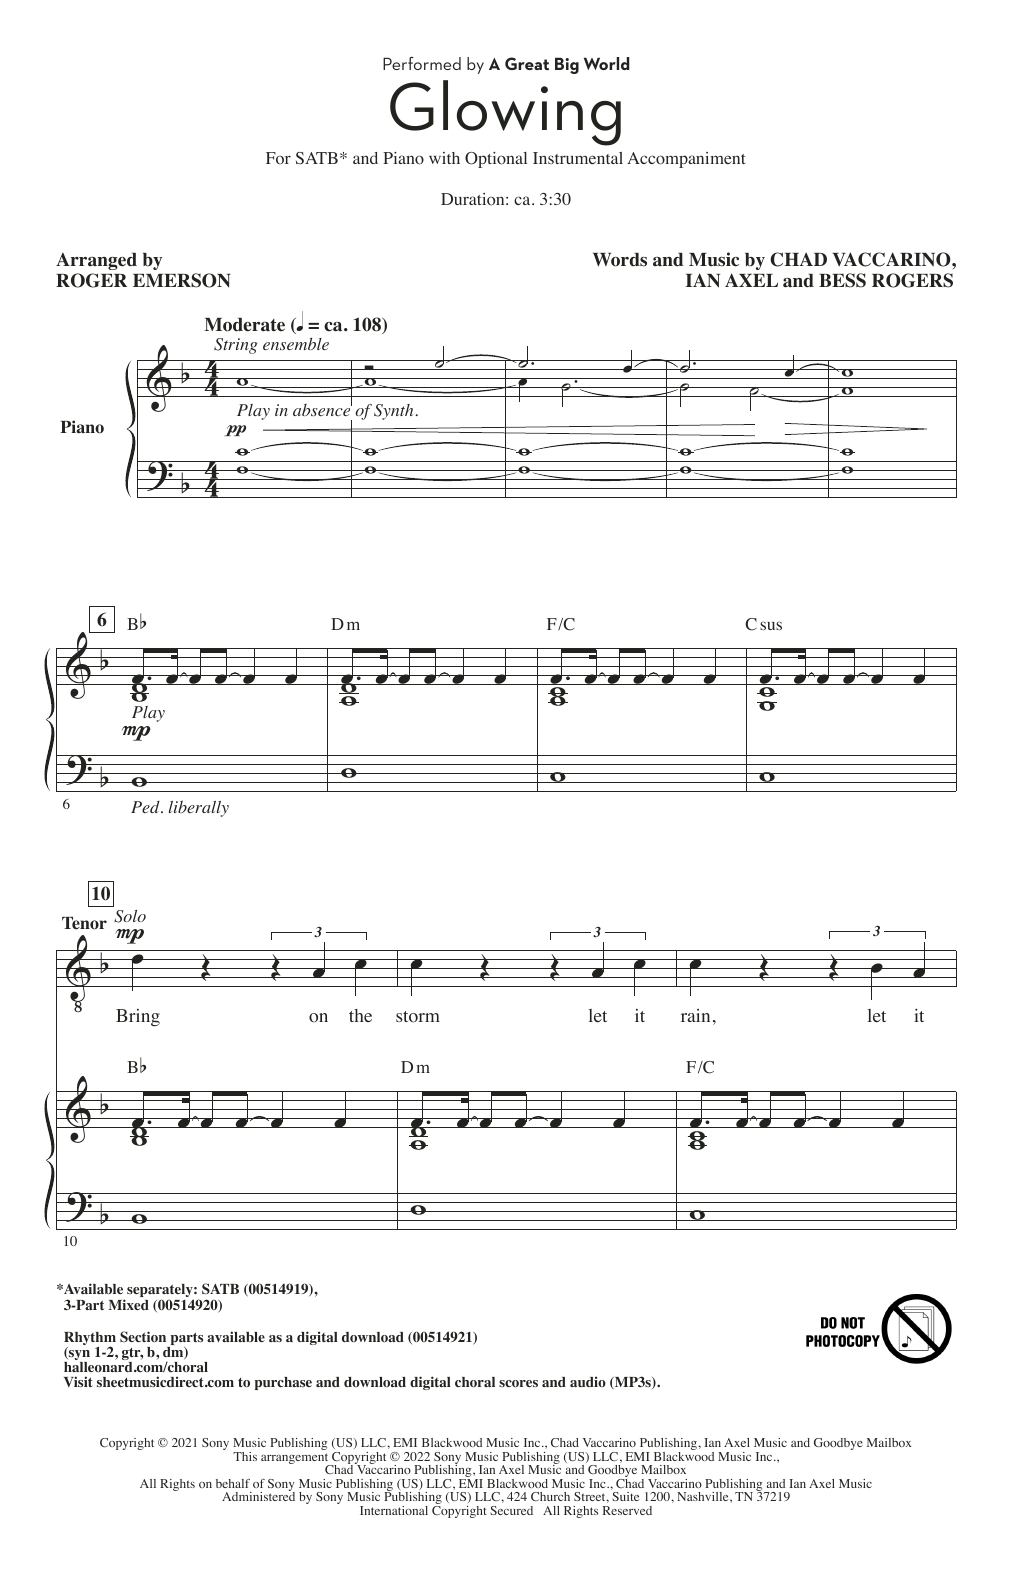 Download A Great Big World Glowing (arr. Roger Emerson) Sheet Music